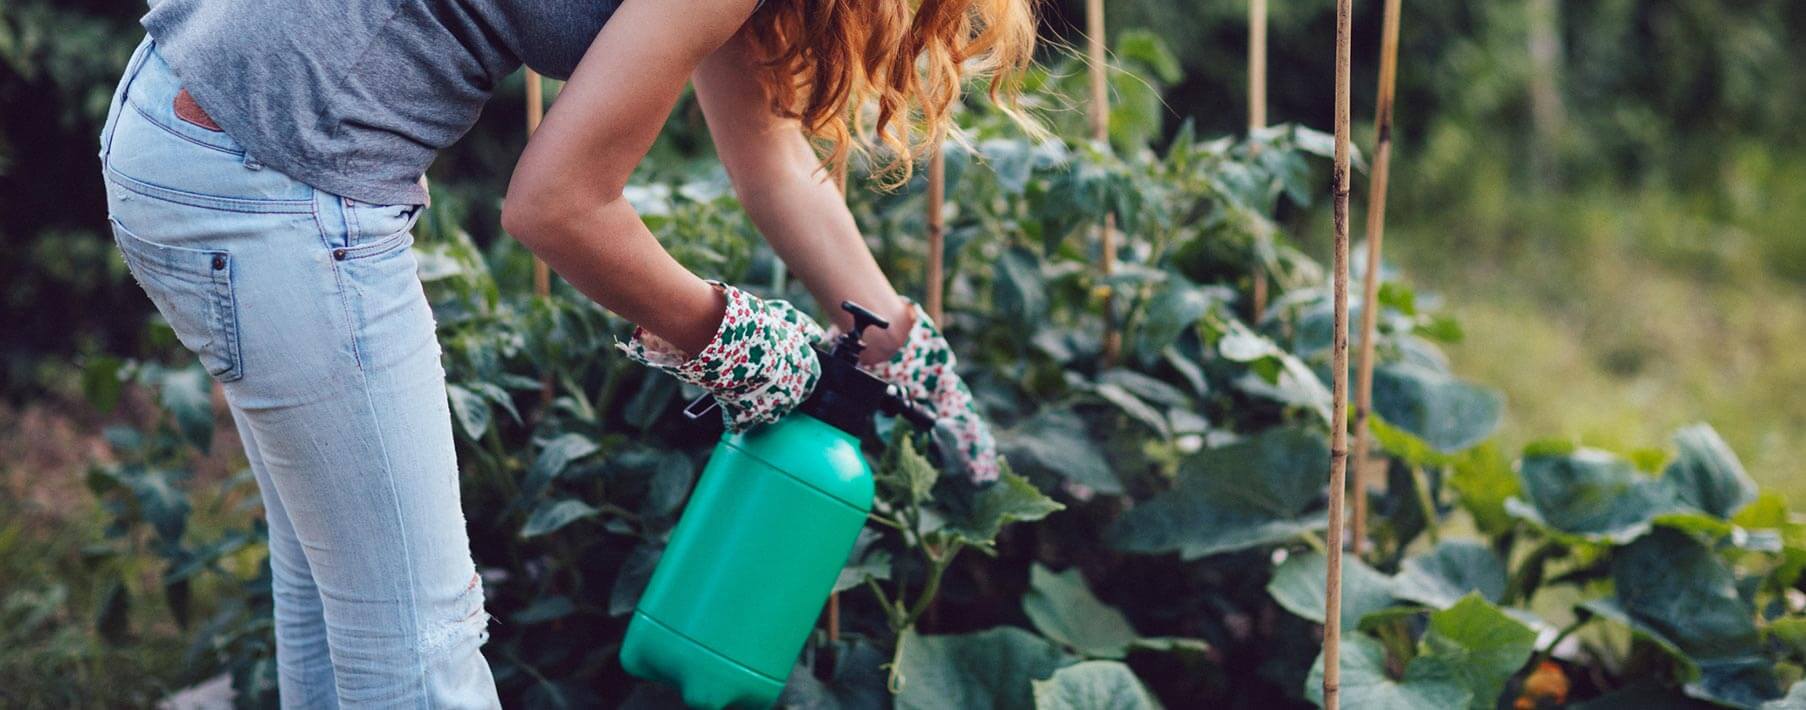 A young woman leans over a garden holding a large spray bottle and spraying plants